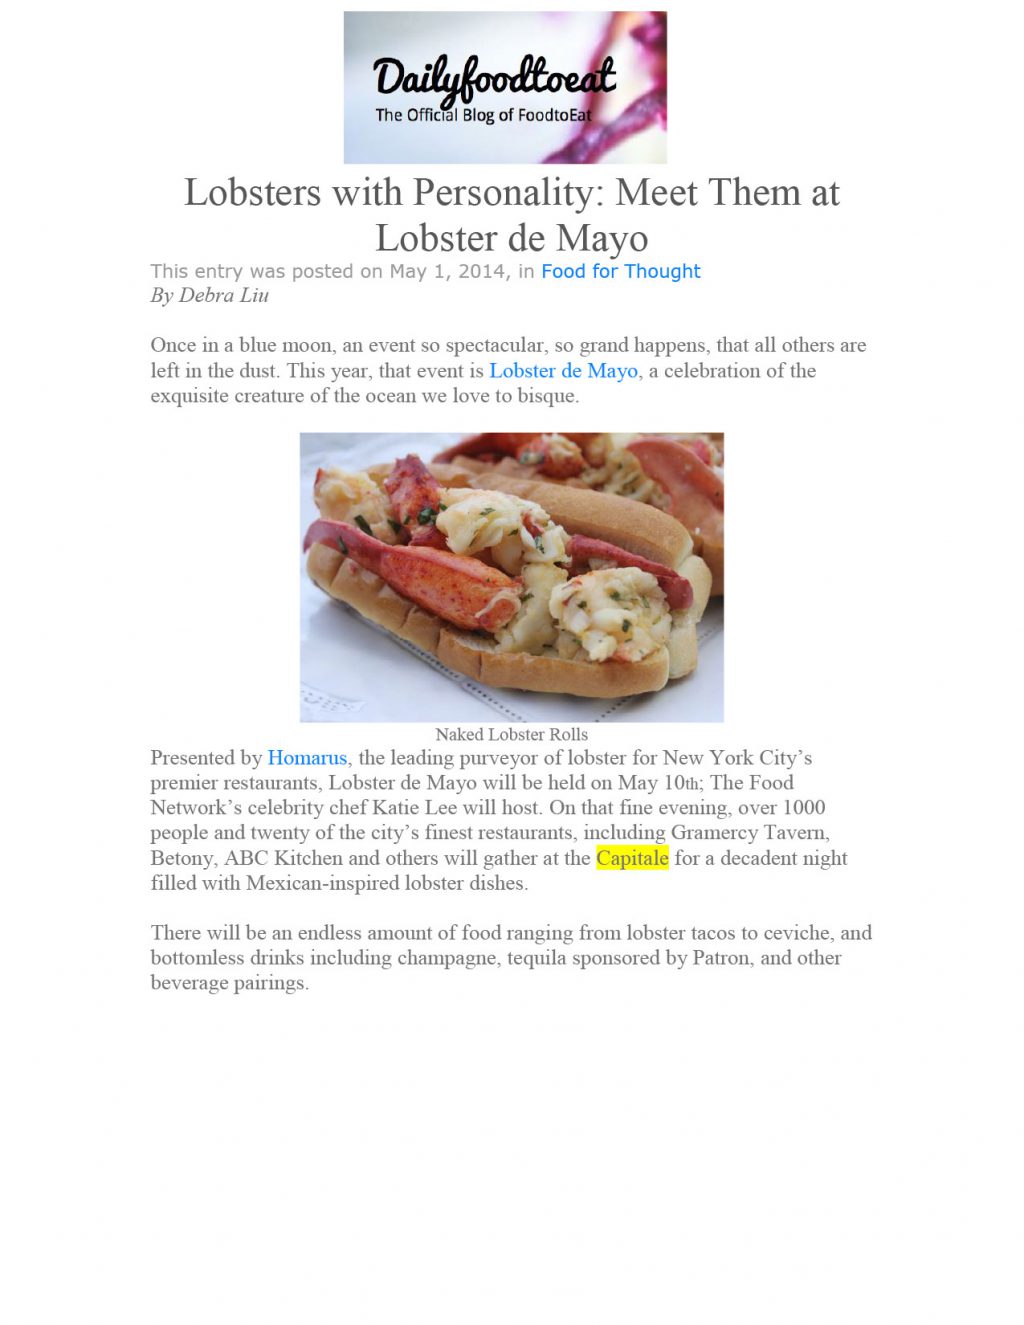 Daily-Food-to-Eat_LobsterMayo_Capitale_5_10_14-1